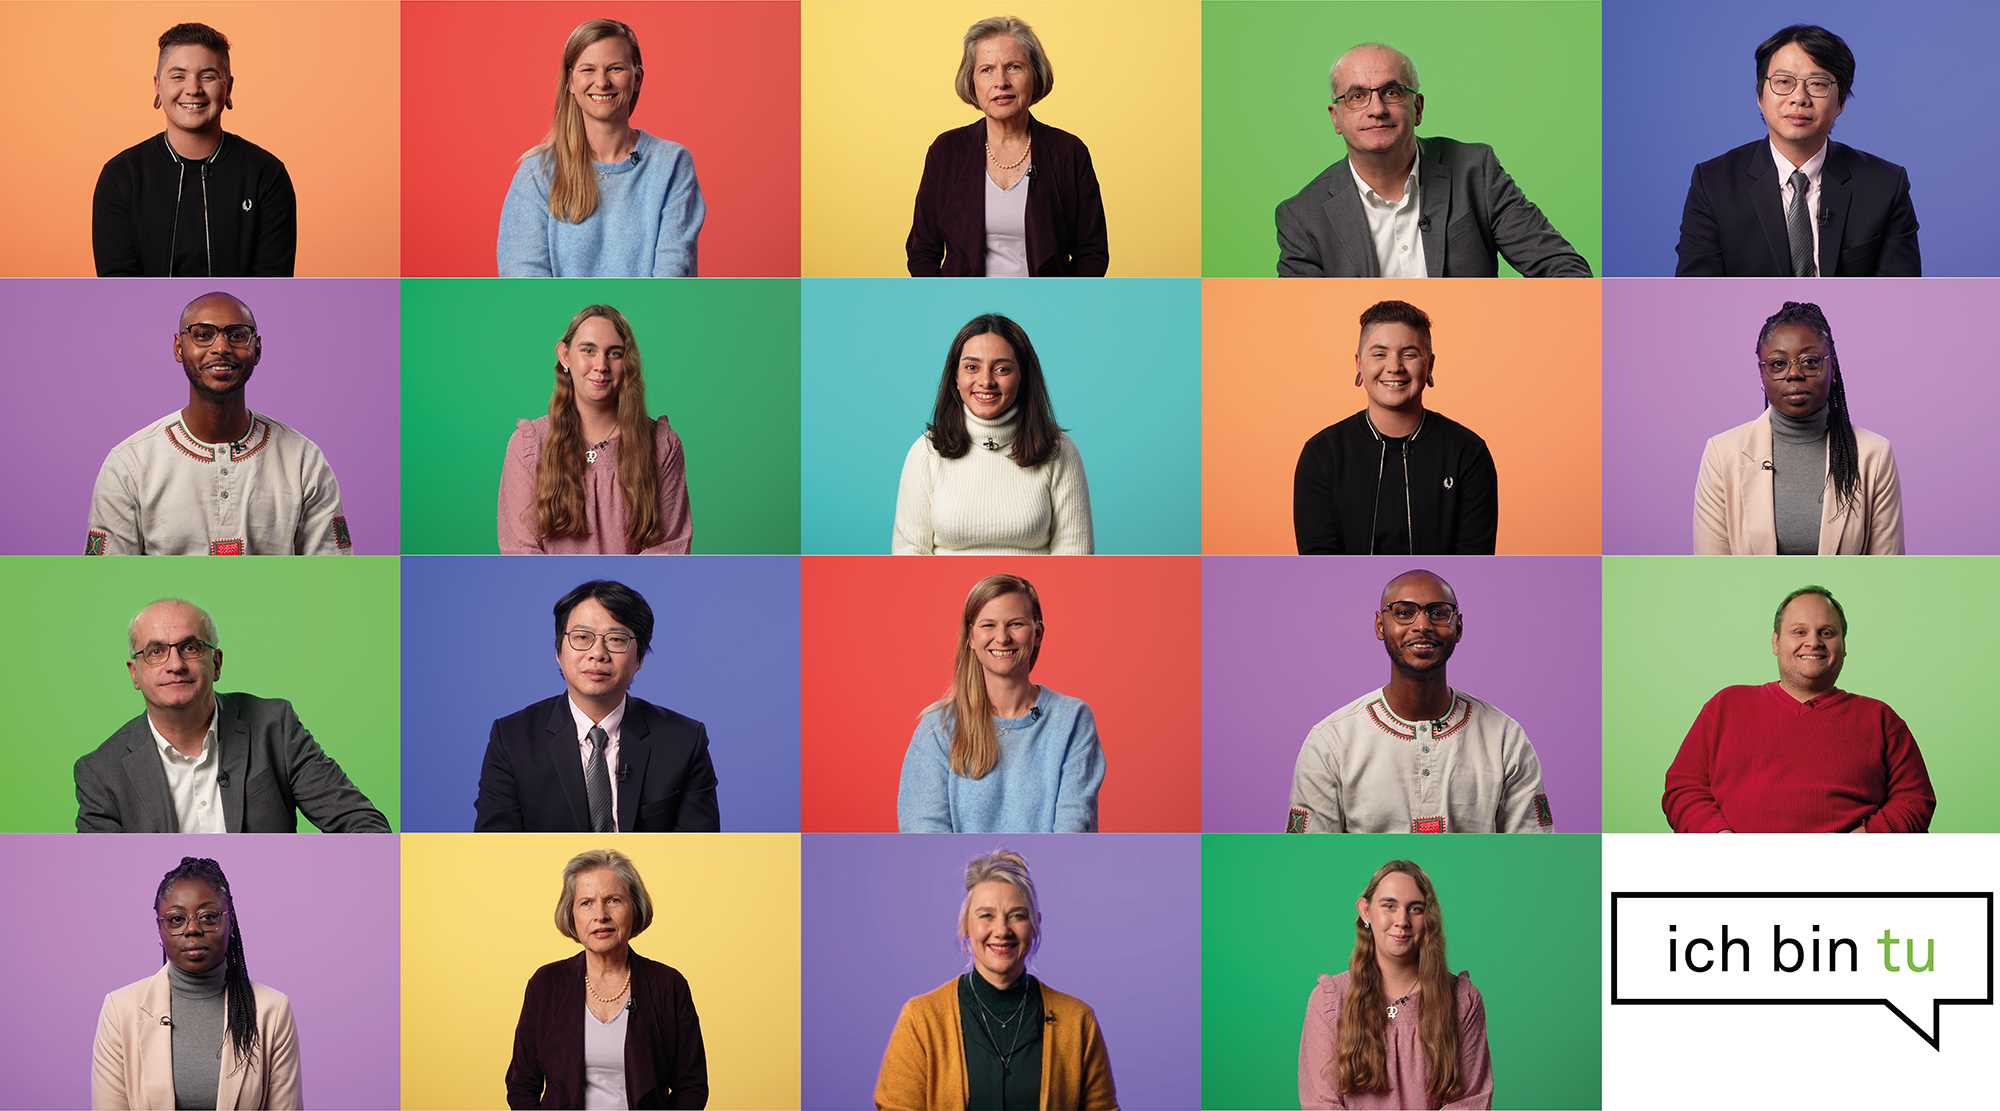 19 people are arranged individually against colorful backgrounds in a rectangle with 4x5 tiles. The bottom rightmost tile contains a speech bubble with the words "I am tu".